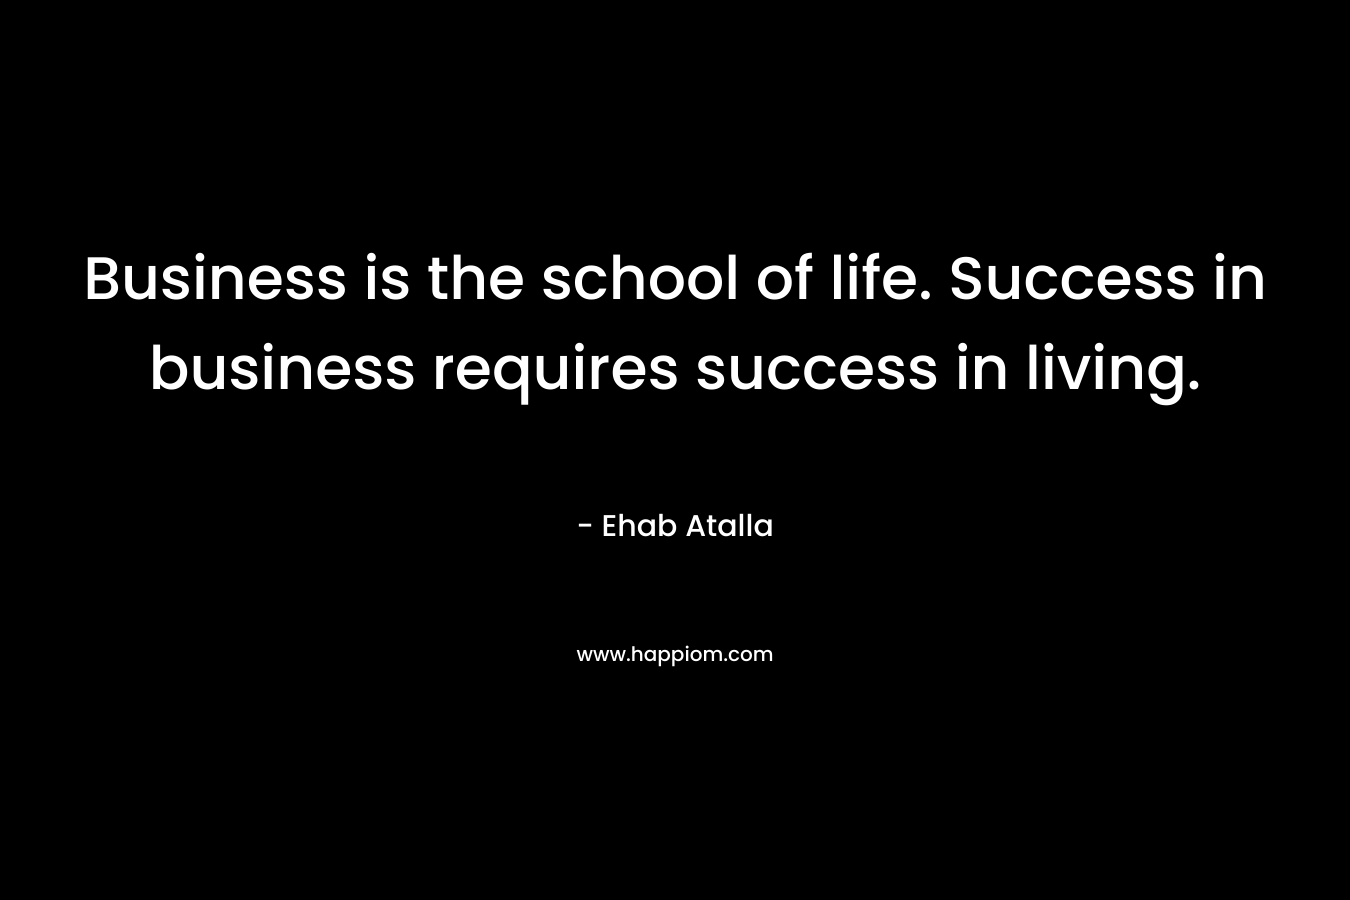 Business is the school of life. Success in business requires success in living.